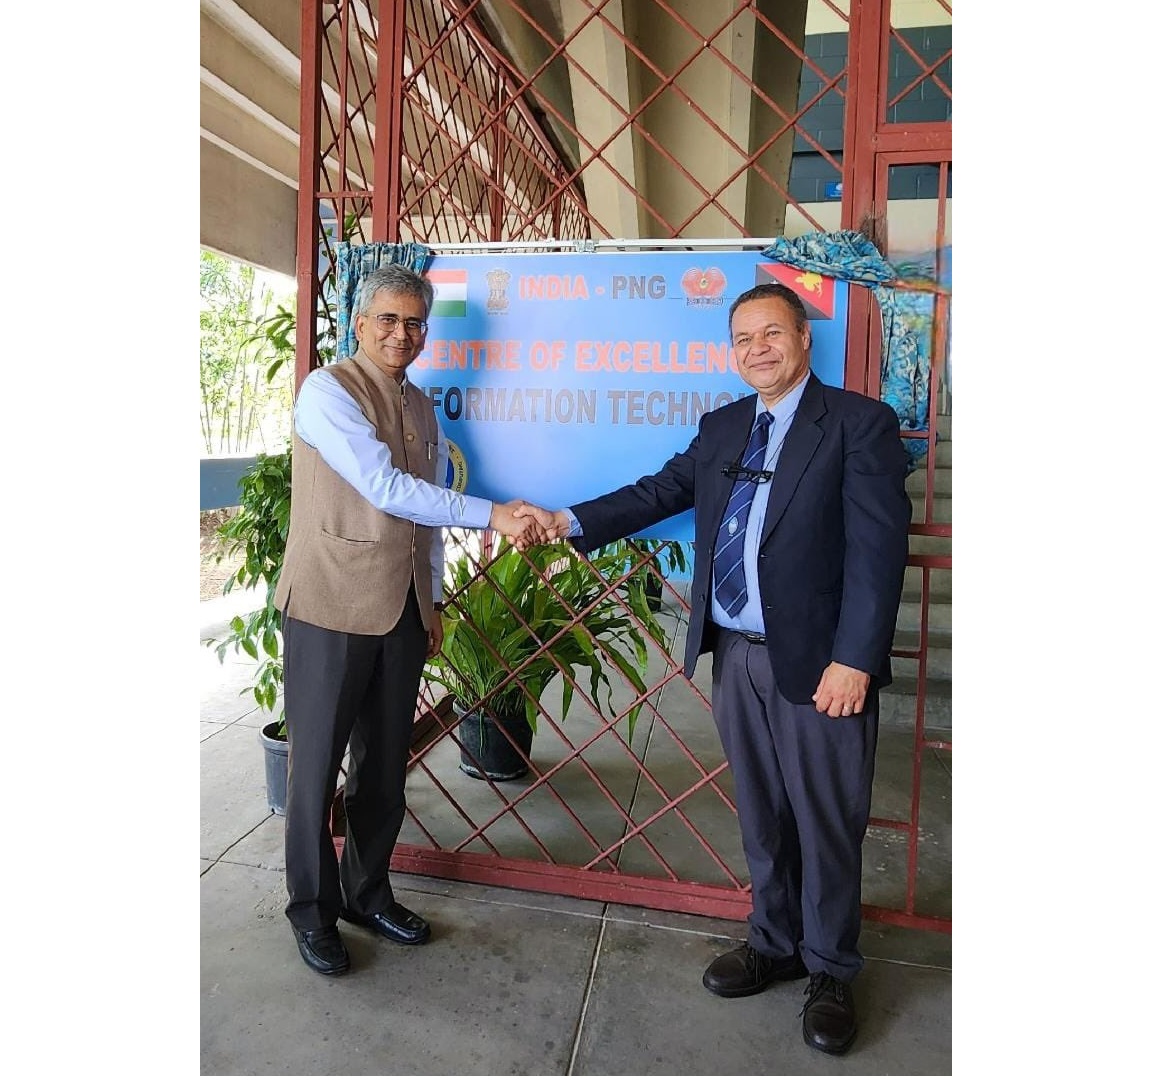 Shri Saurabh Kumar, Secretary (East) visited University of PNG and held discussions with Vice Chancellor on strengthening educational links. Unveiled a plaque at the Centre for Excellence in IT established by India.